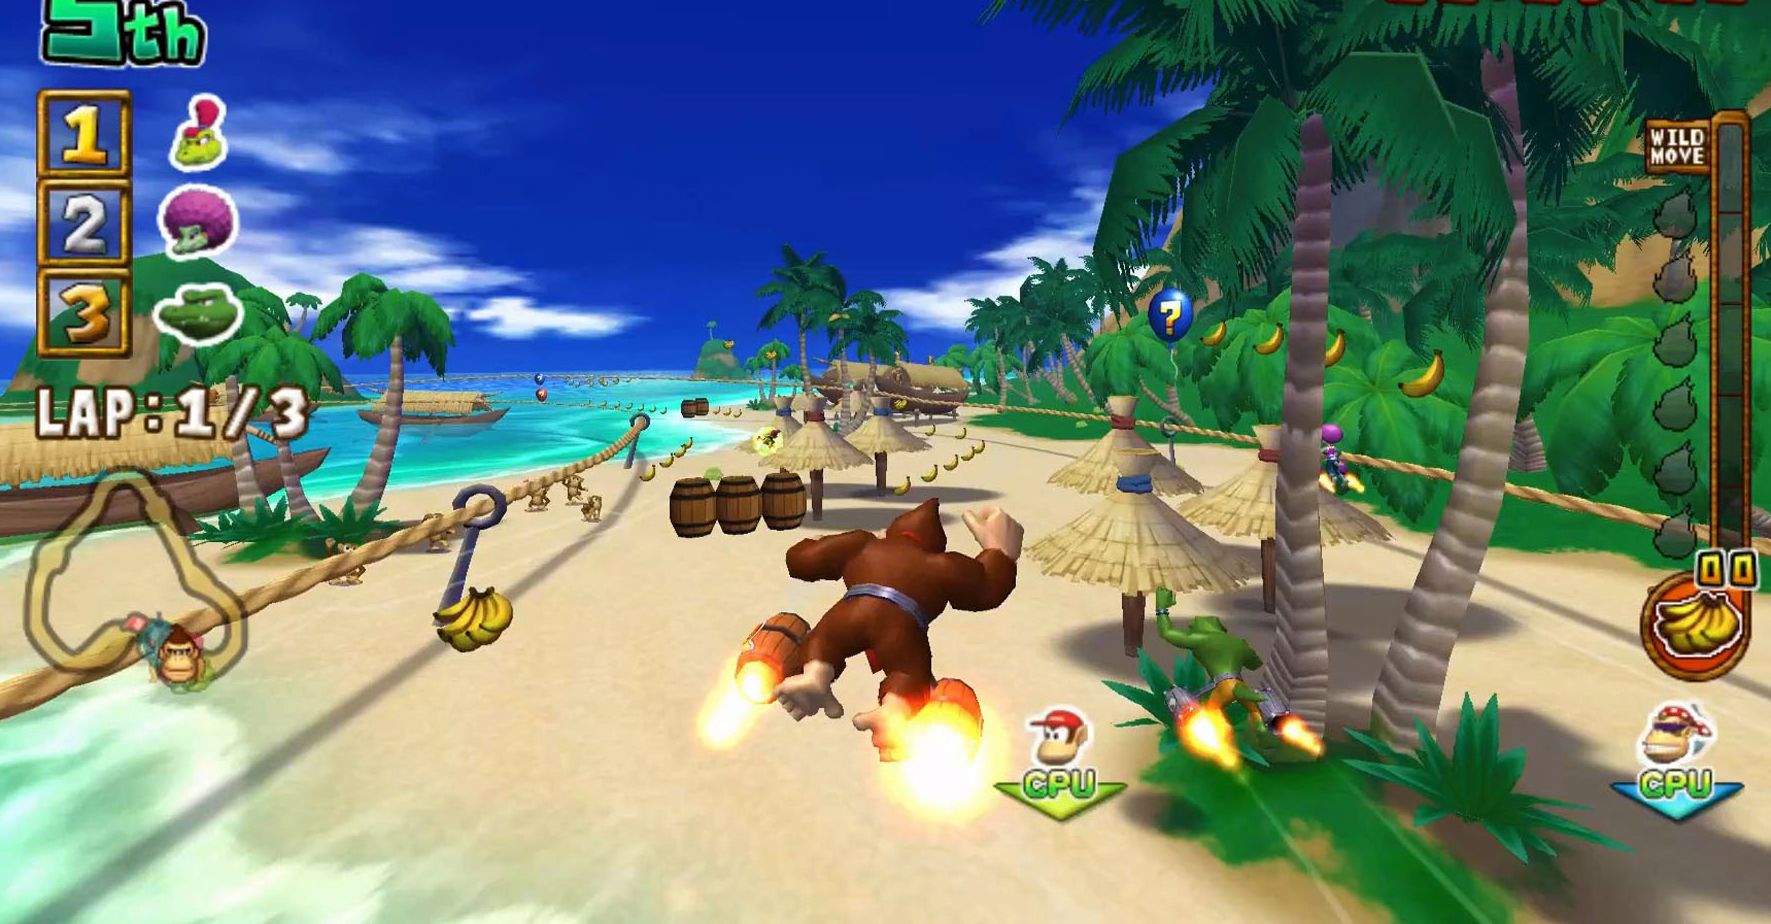 The 20 Worst Nintendo Games Of All Time According To Metacritic (And The 10 Best)